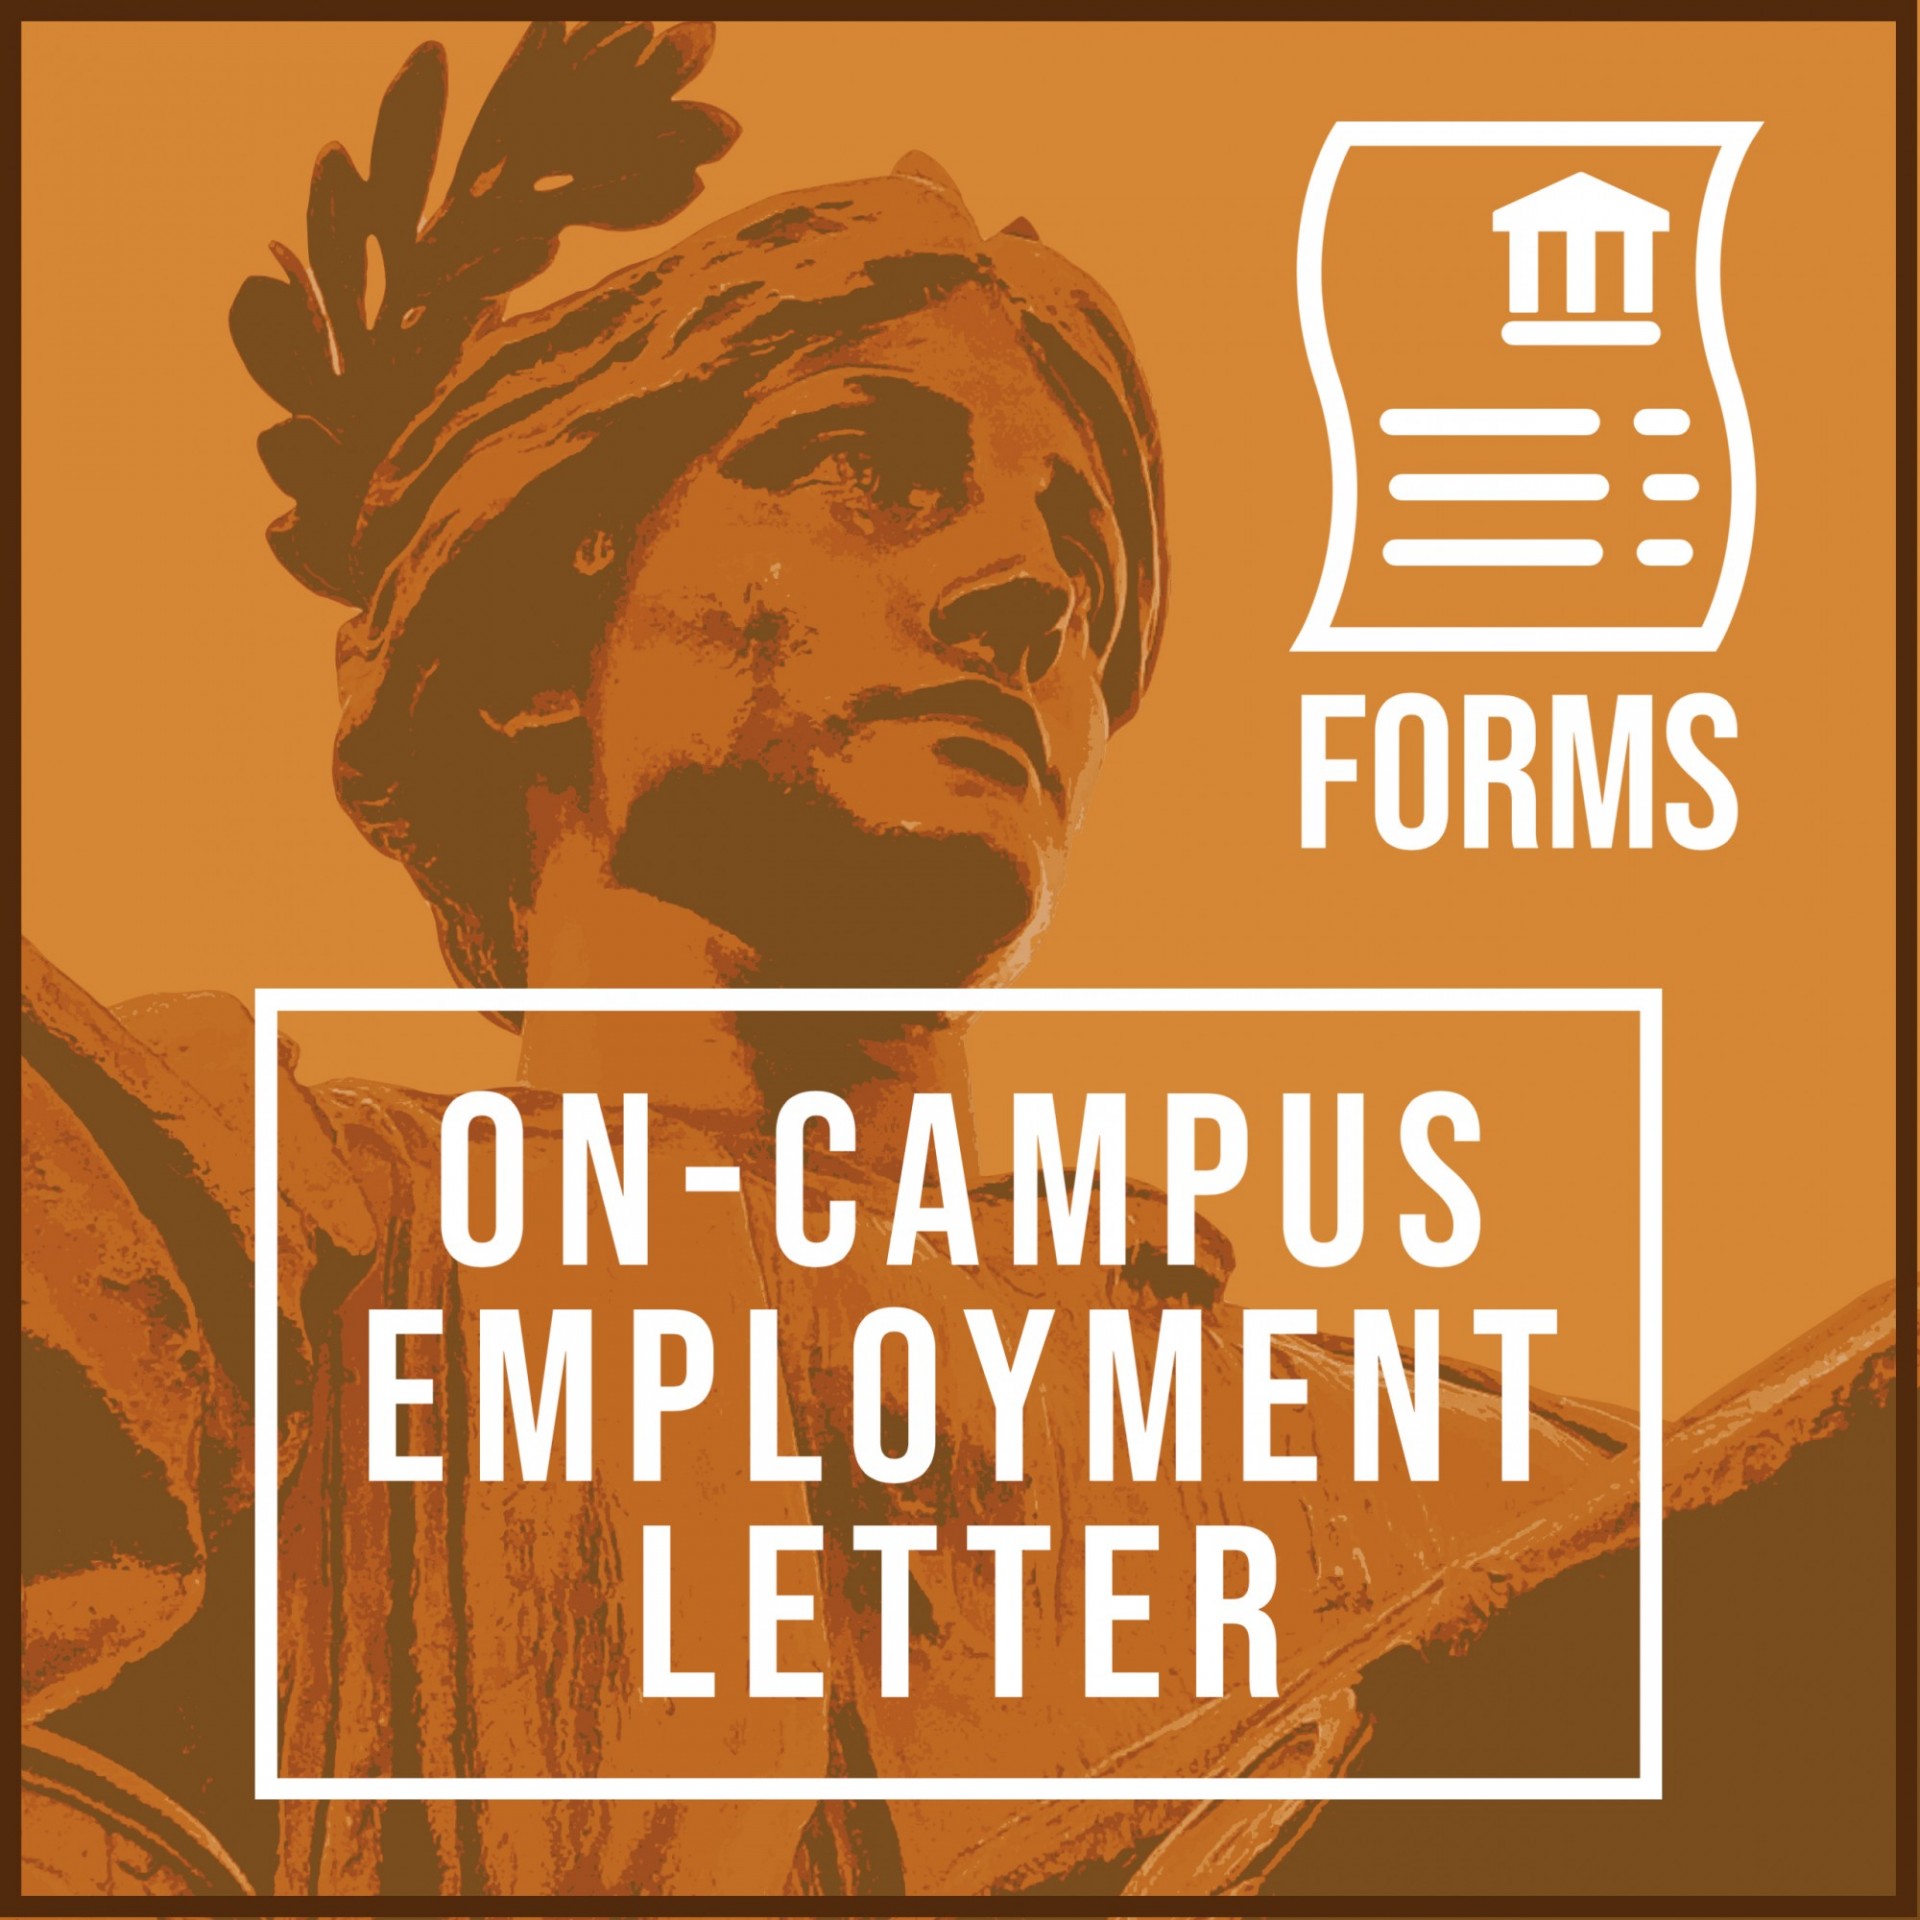 Forms Icon: On Campus Employment Letter